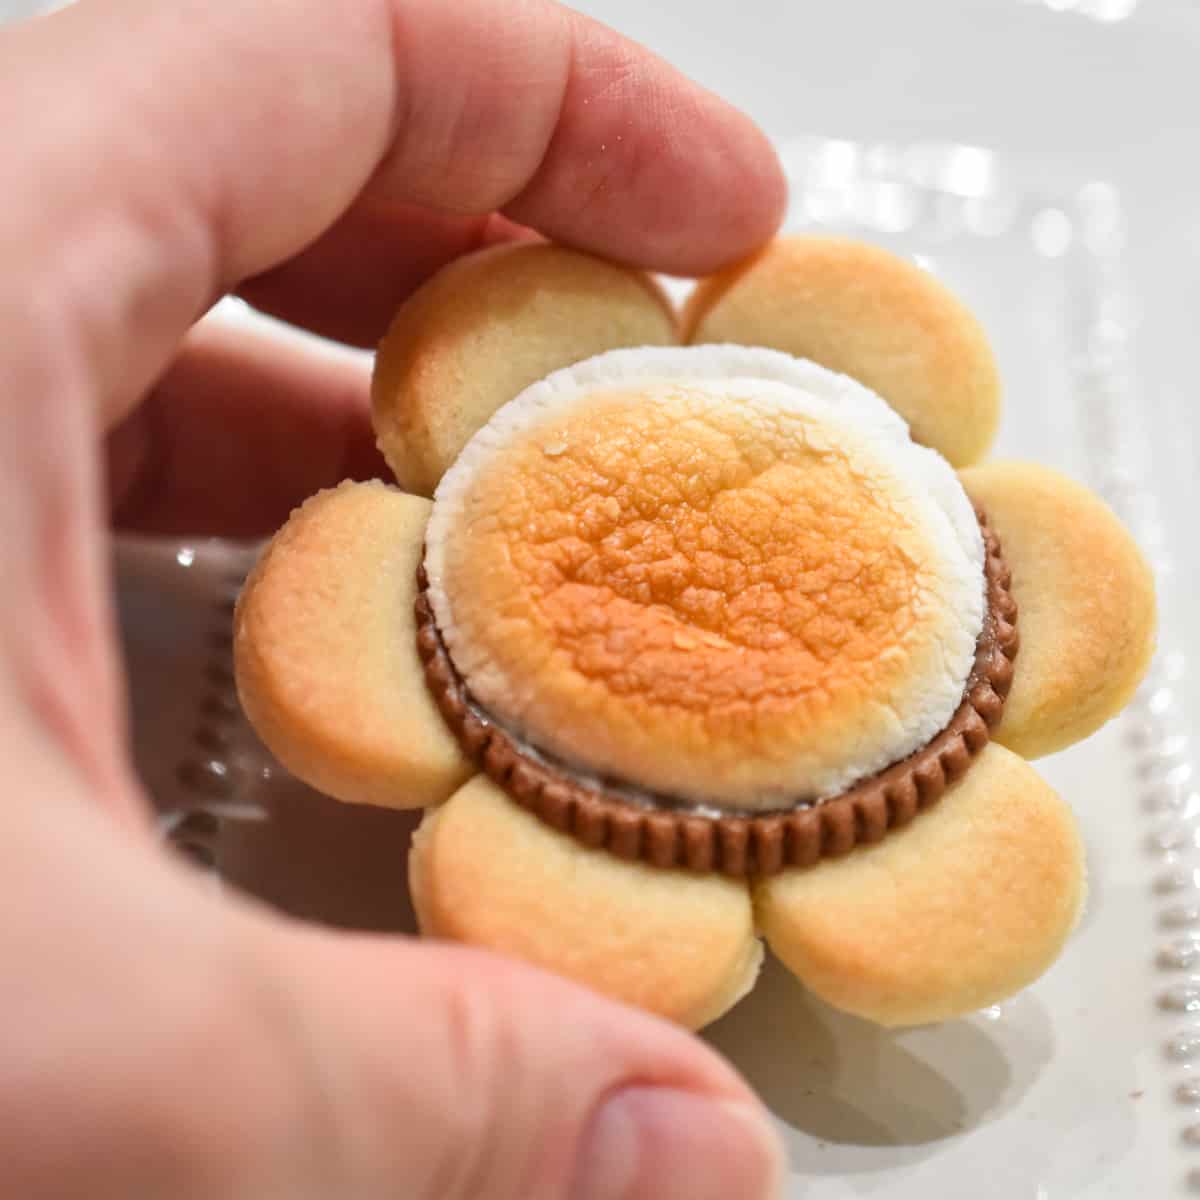 A hand holding one flower shaped cookie cup on the background of a beige plate.